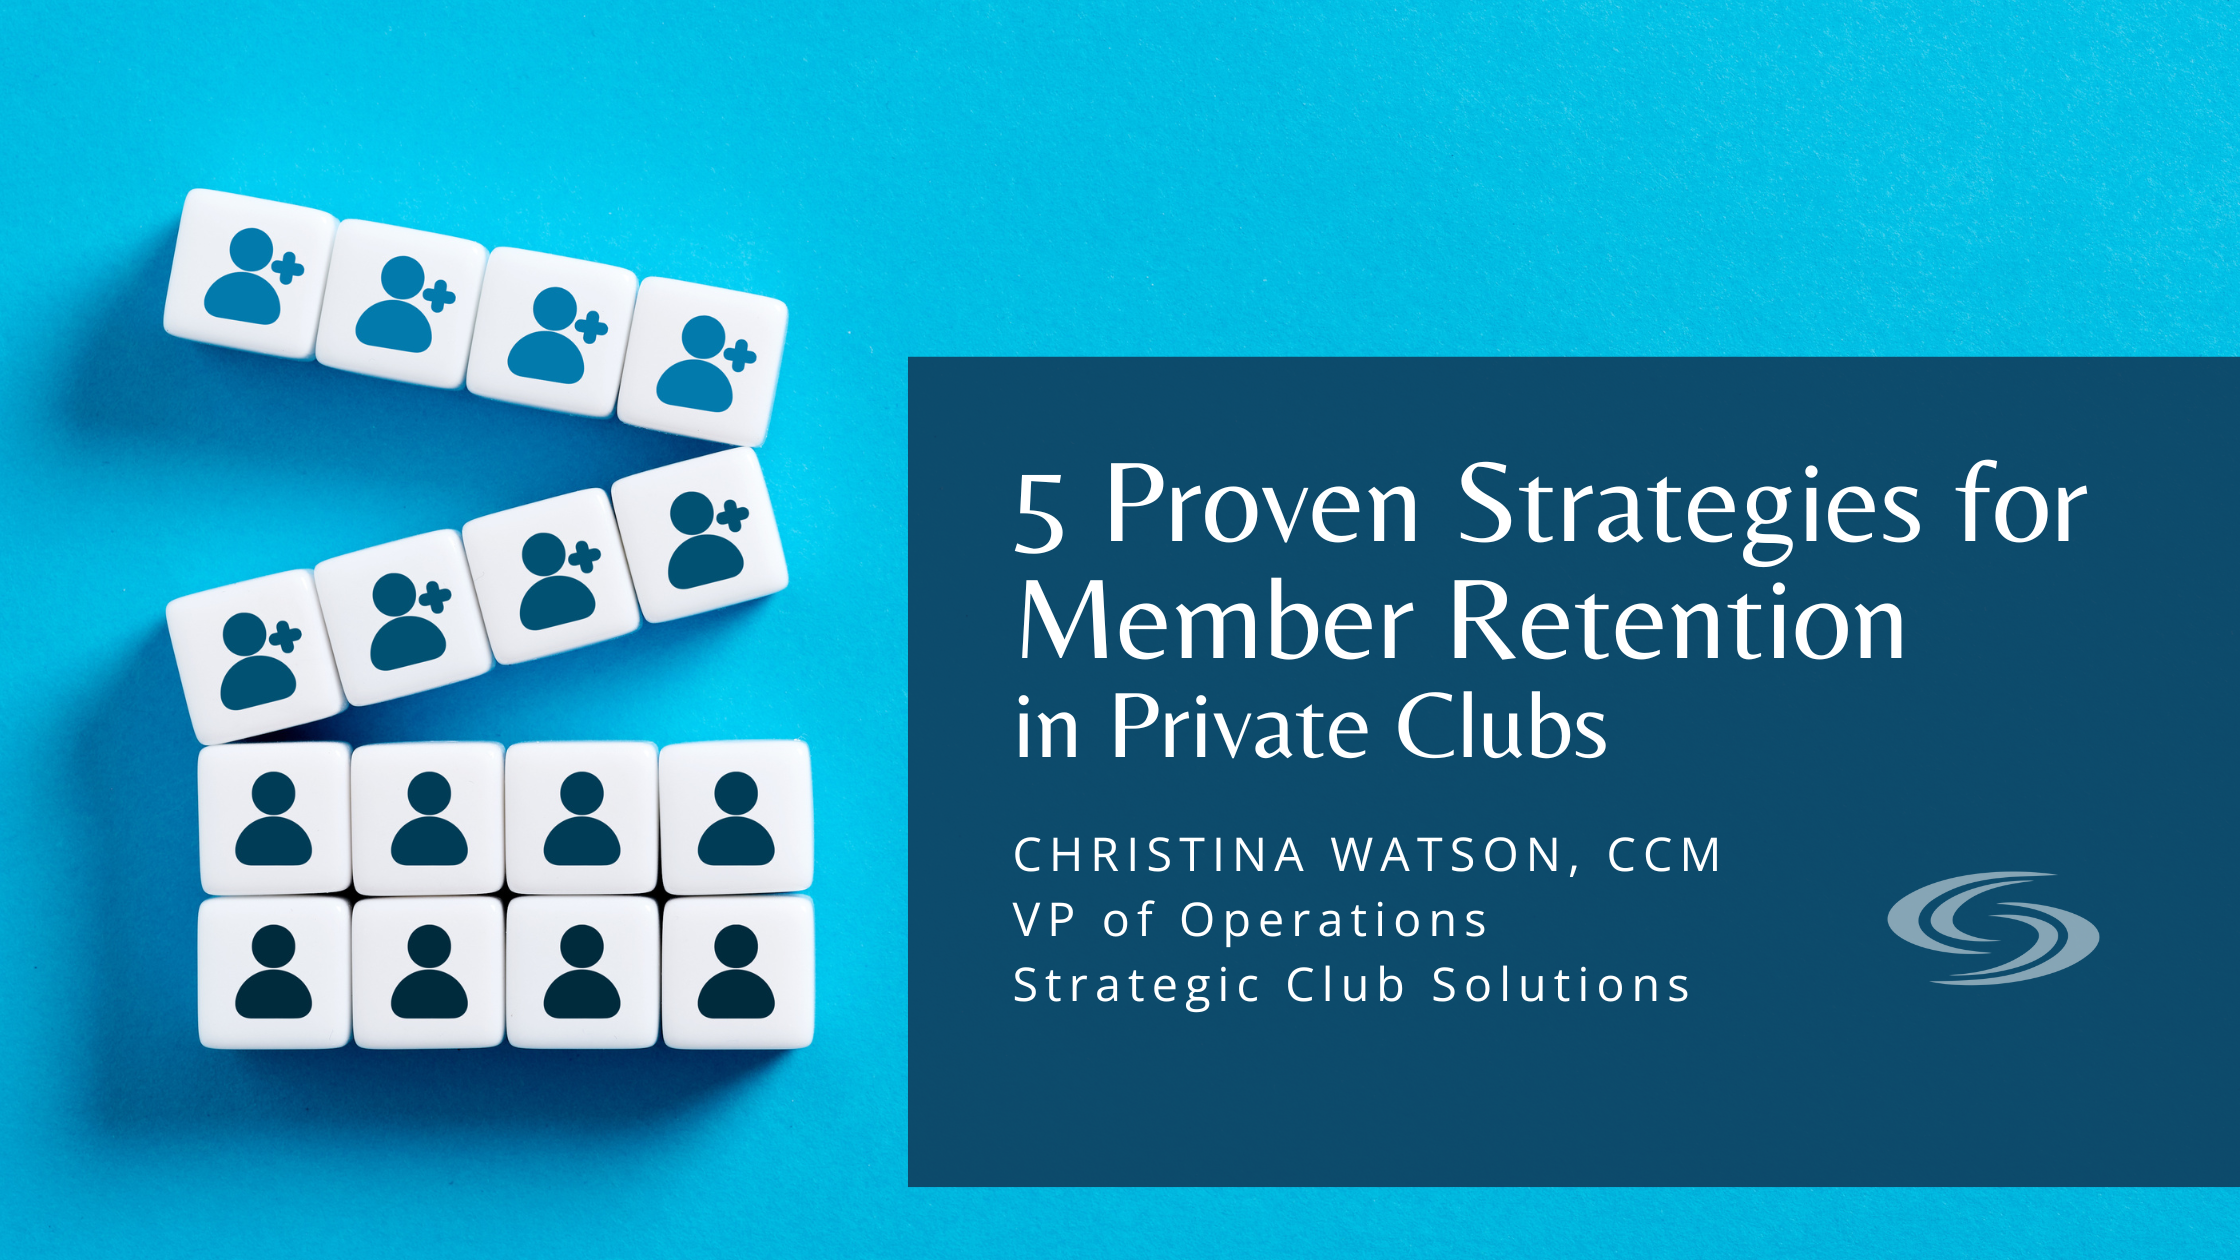 5 Proven Strategies for Member Retention in Private Clubs